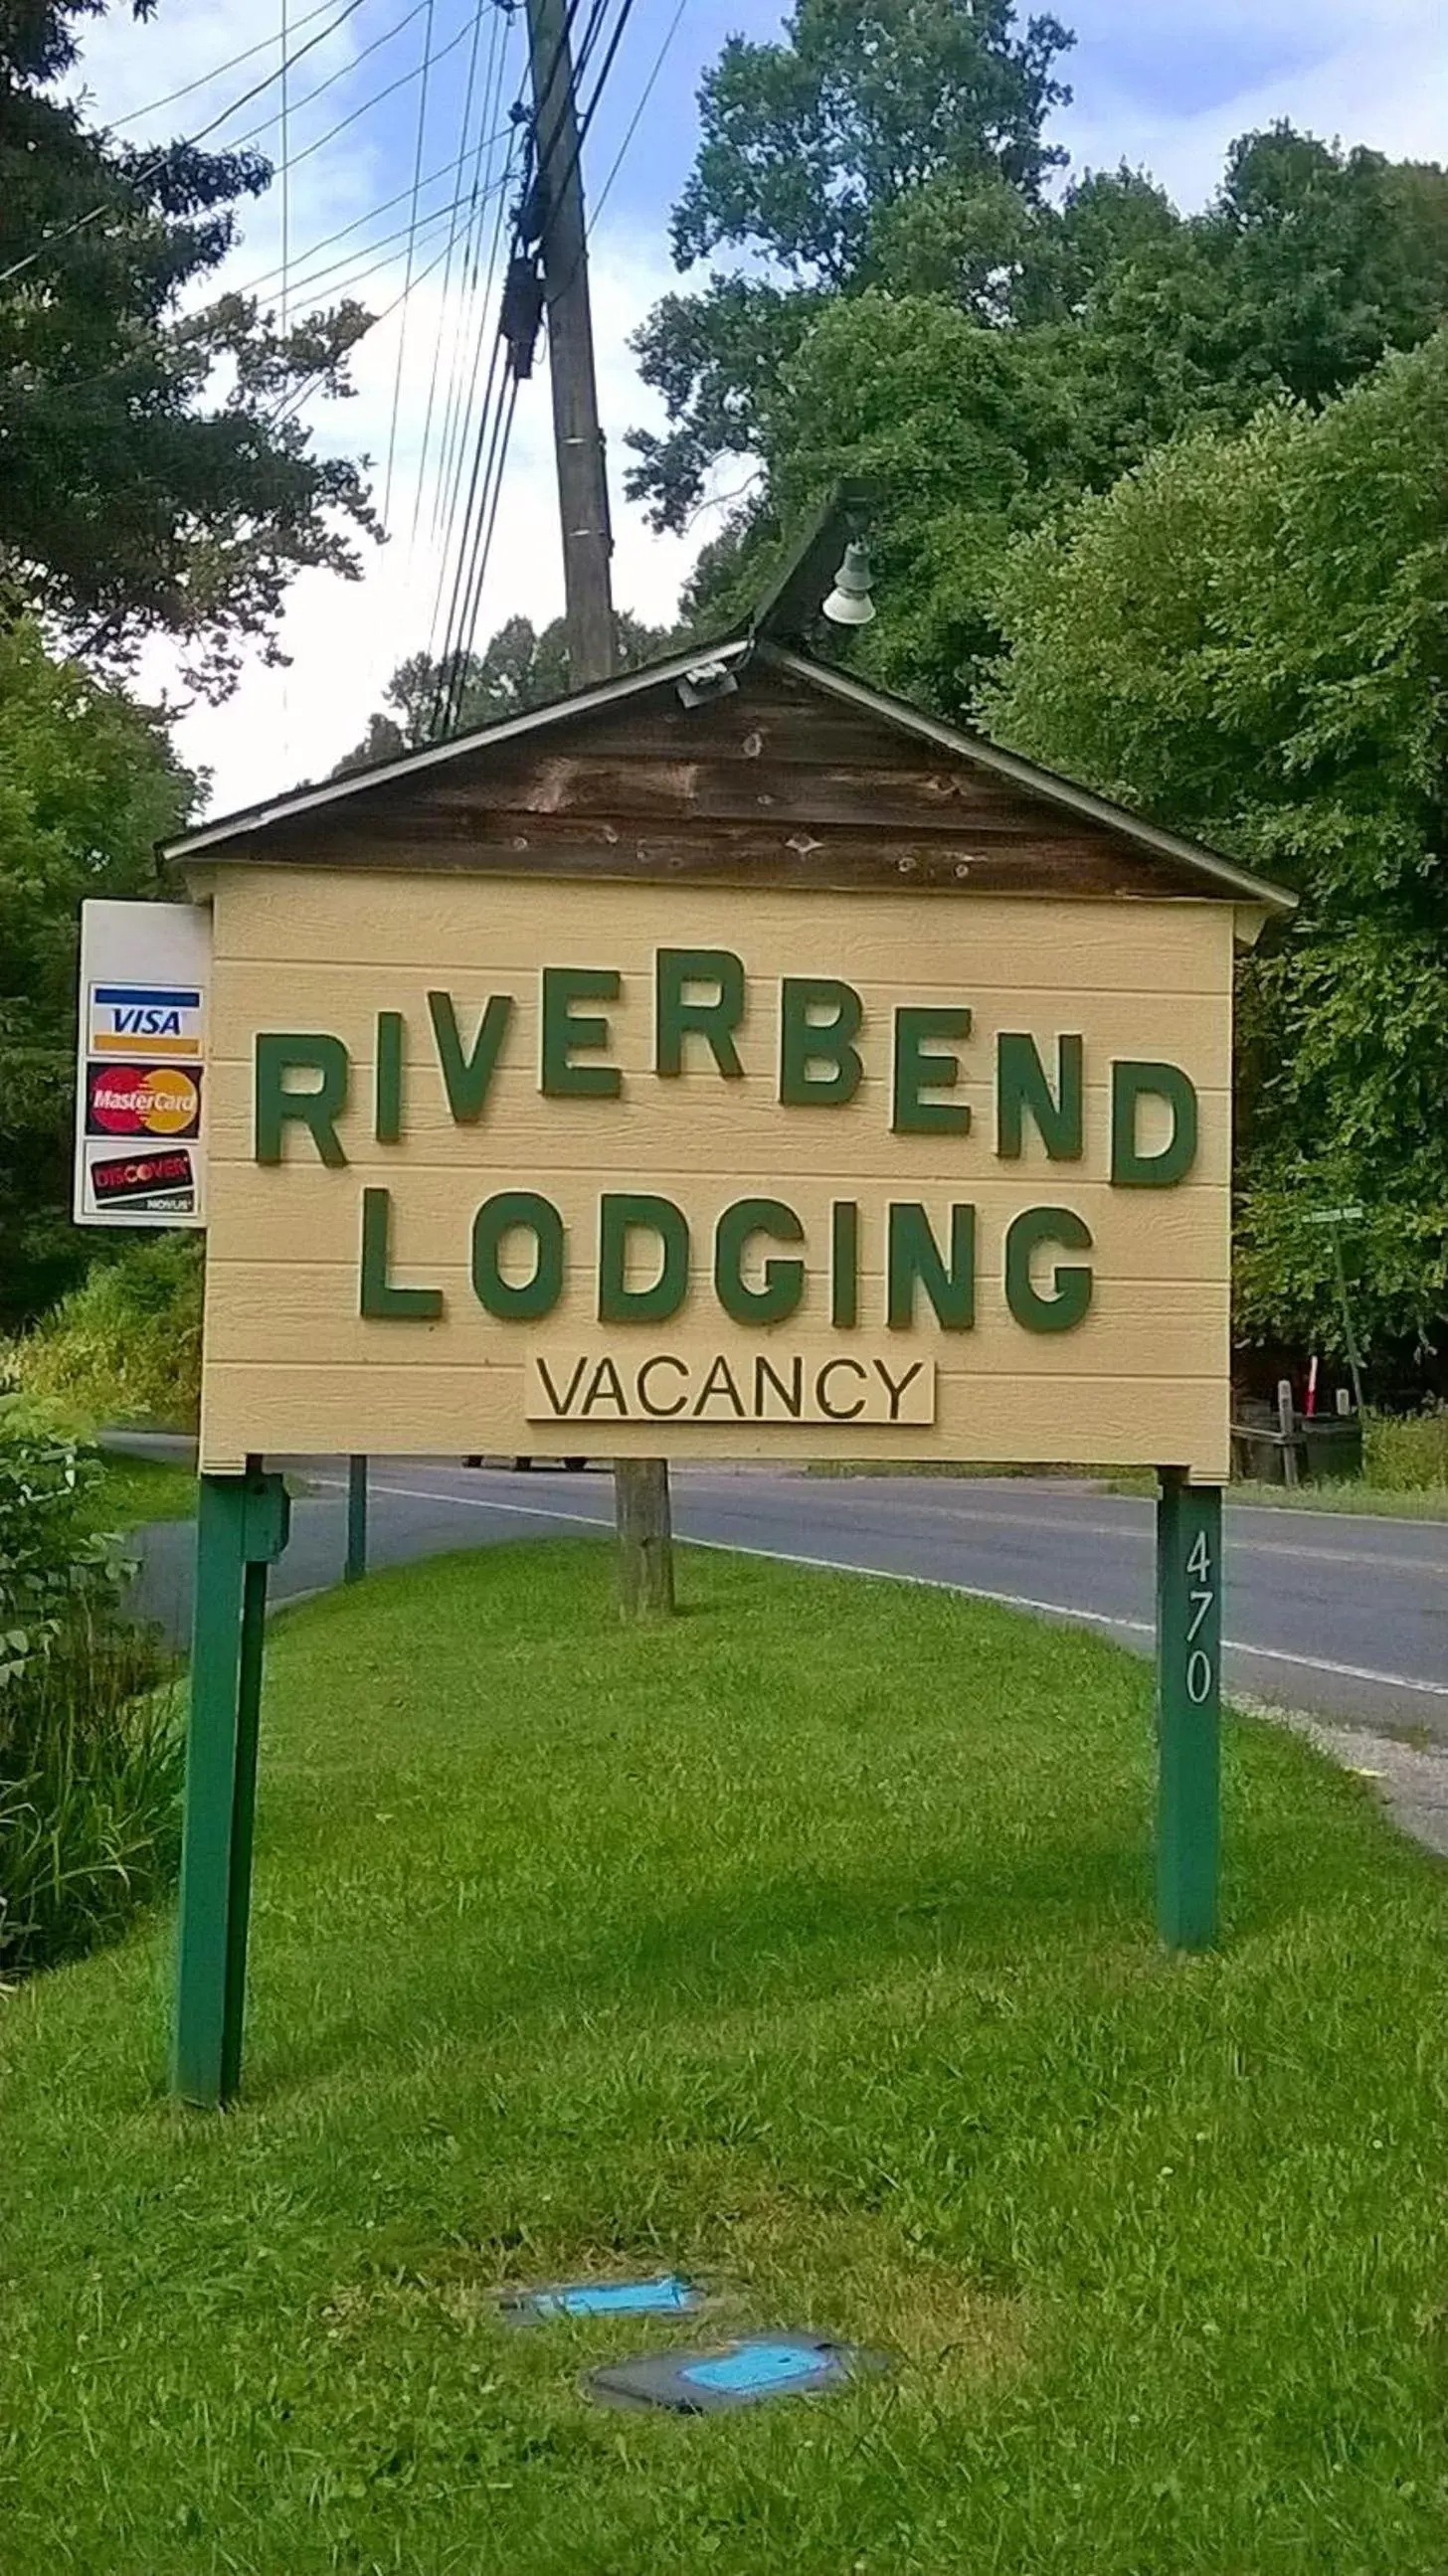 Property logo or sign in Riverbend Lodging